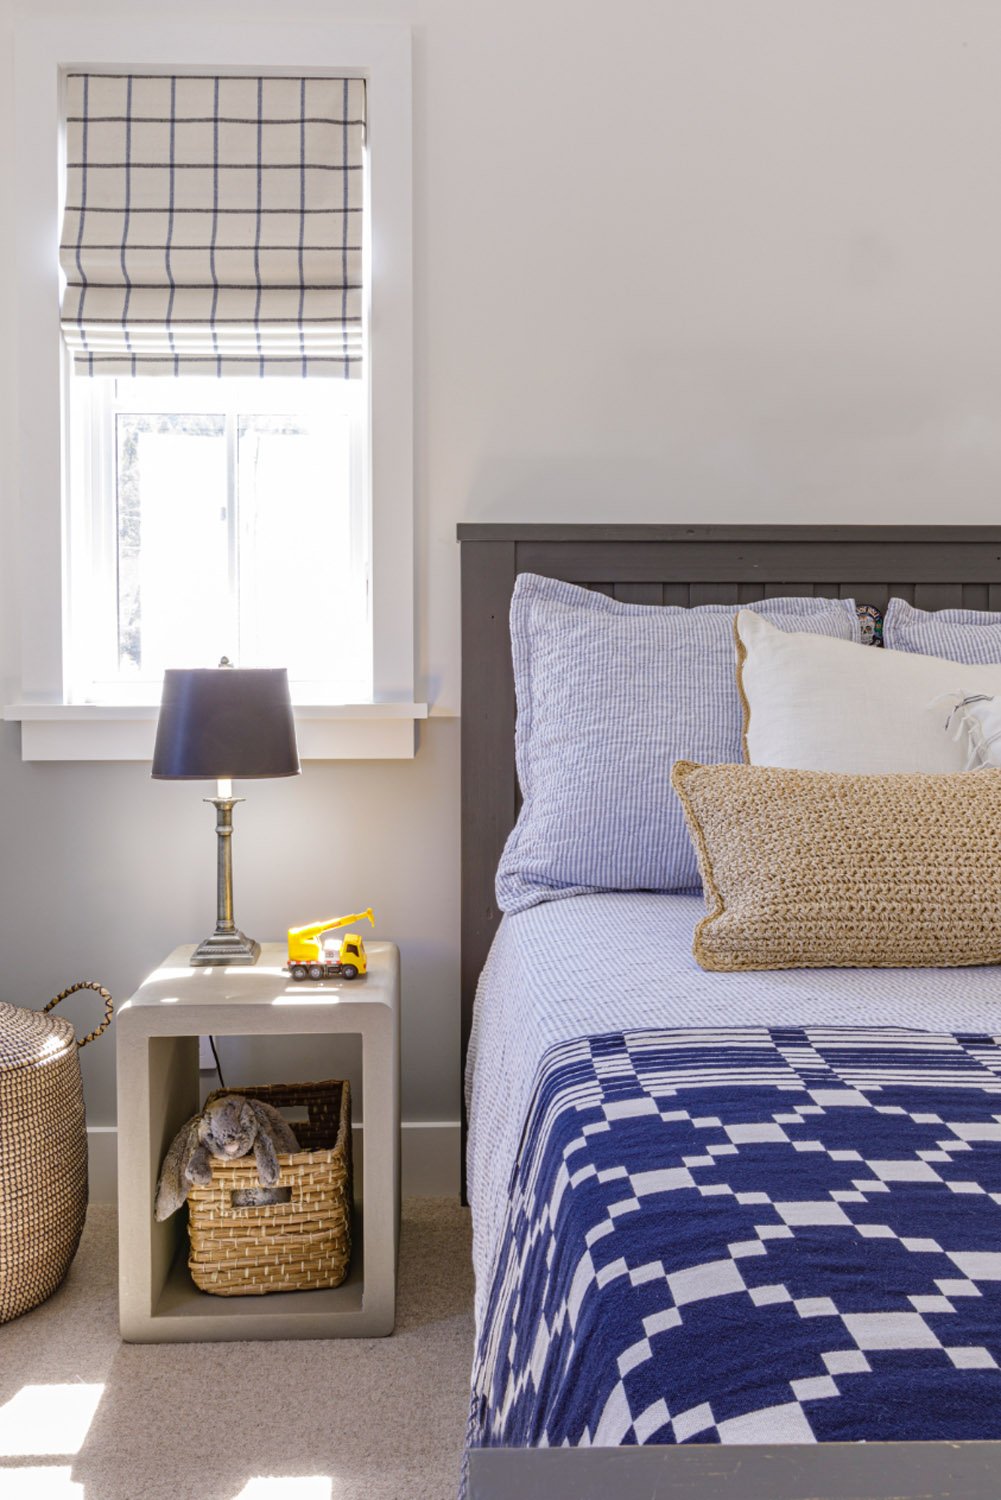 Bed with blue patterned throw and lamp on side table.jpg